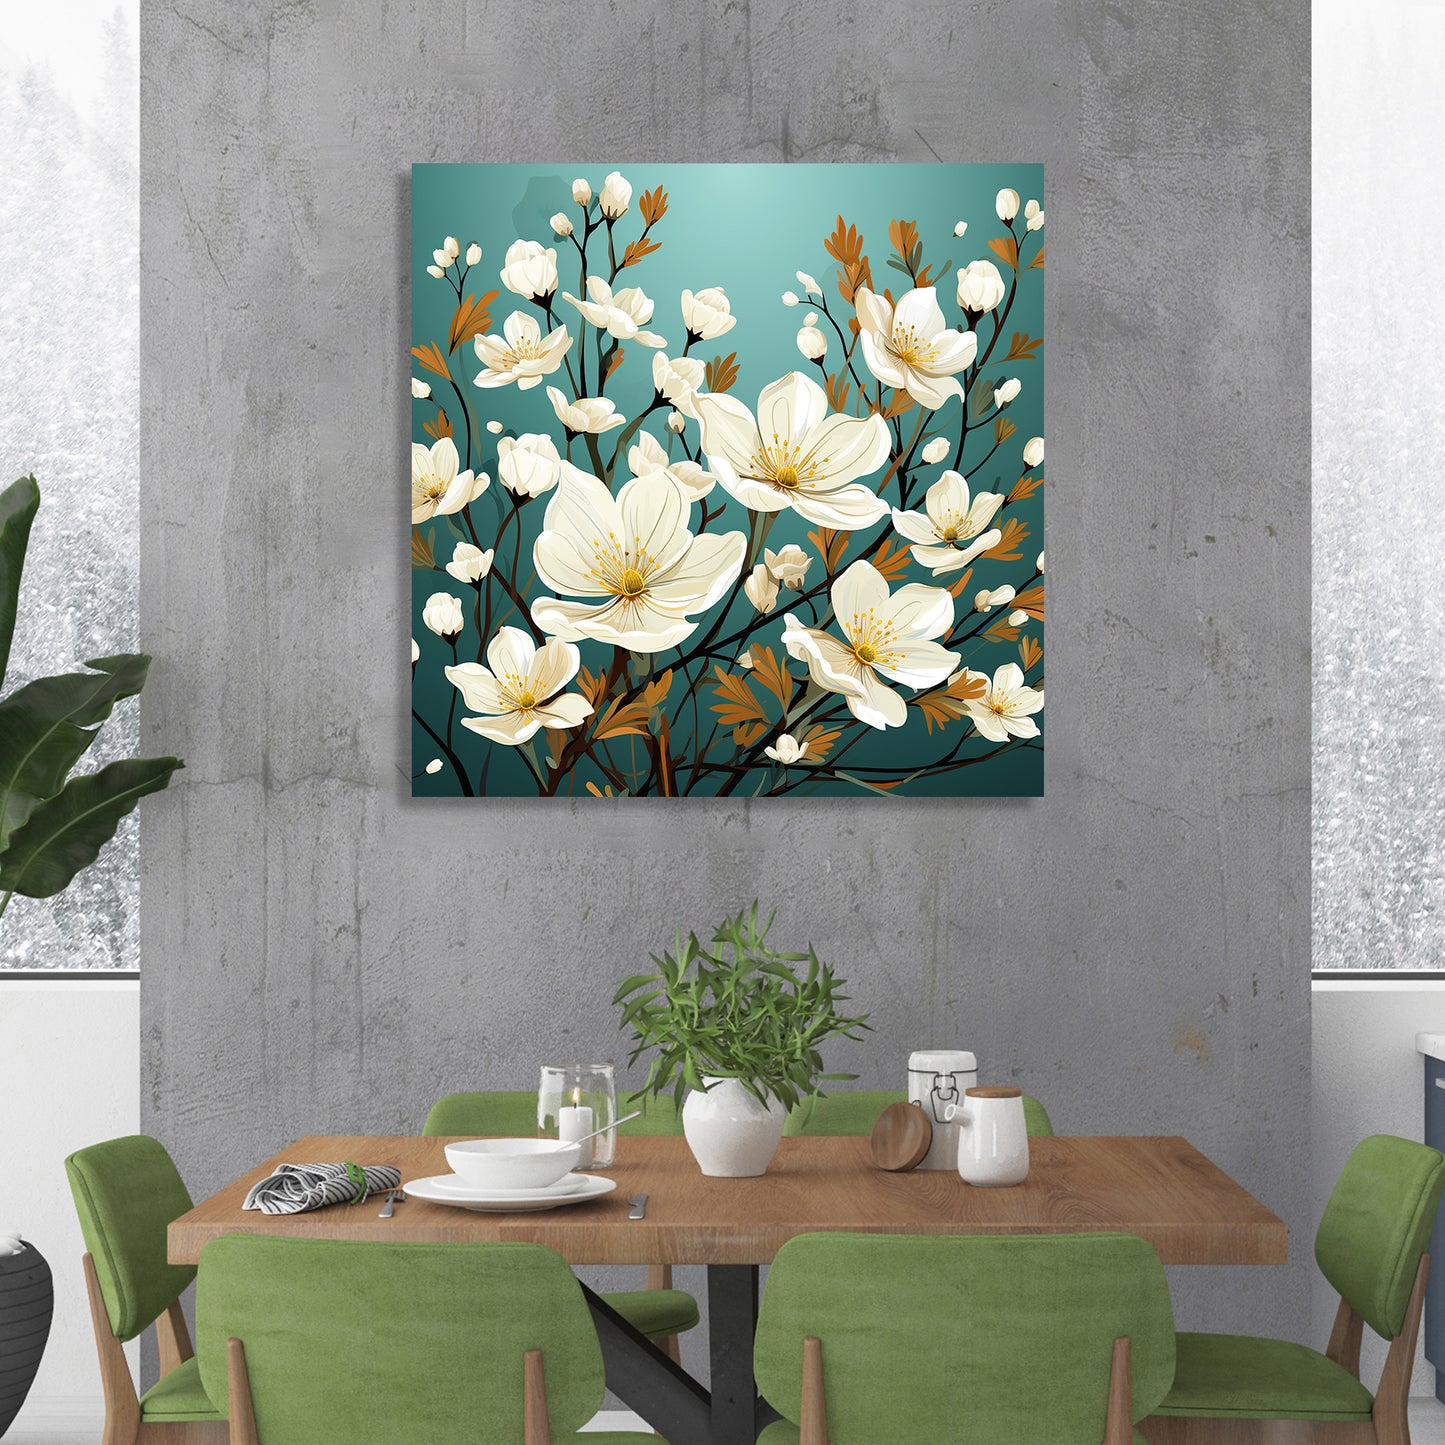 Green and White Floral Canvas Painting for Living Room Bedroom Home and Office Wall Decor